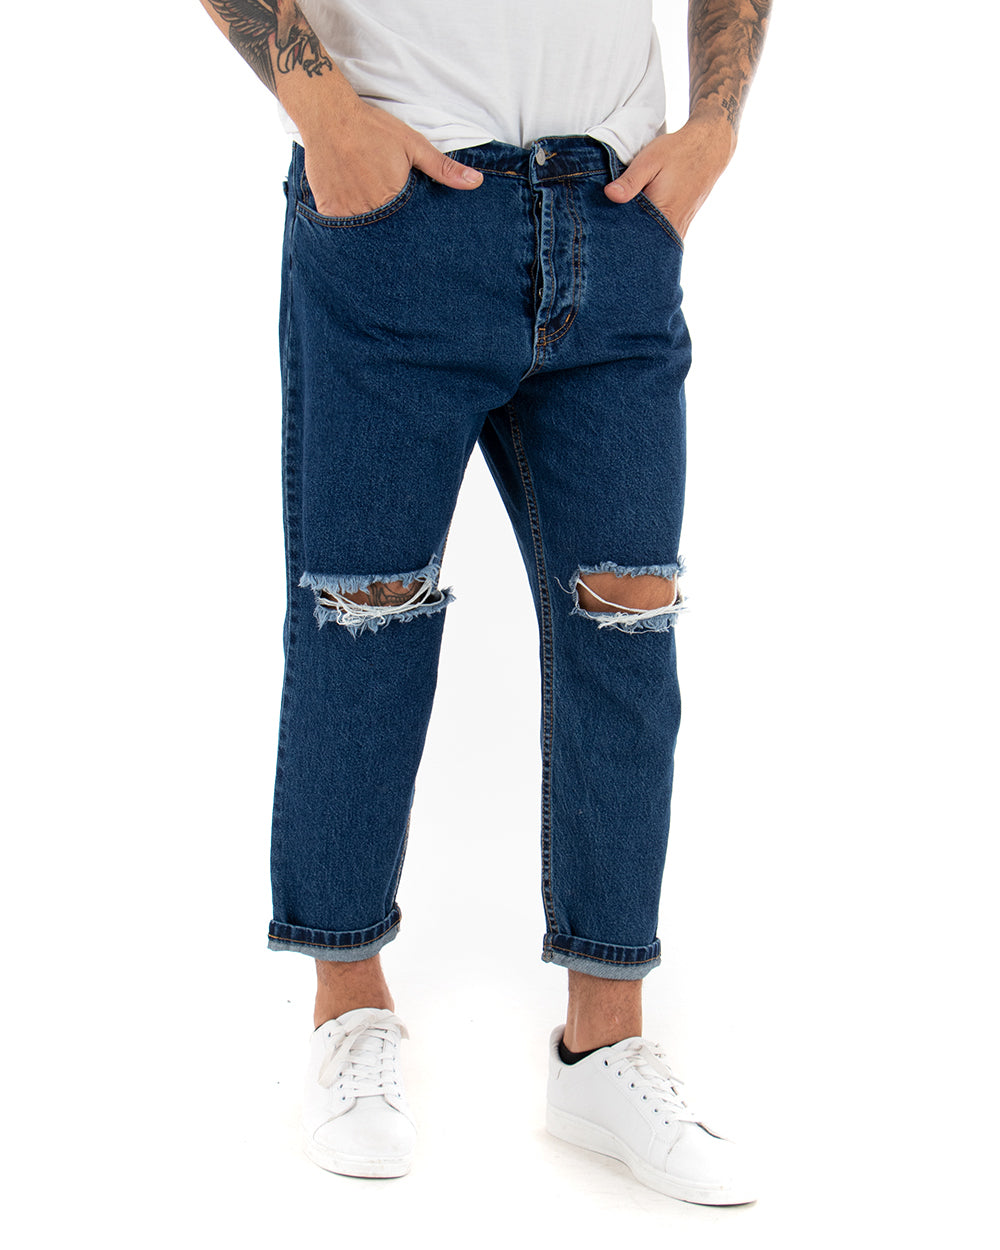 Men's Jeans Trousers Loose Fit Denim Knee Cut Five Pockets Casual GIOSAL-P3019A